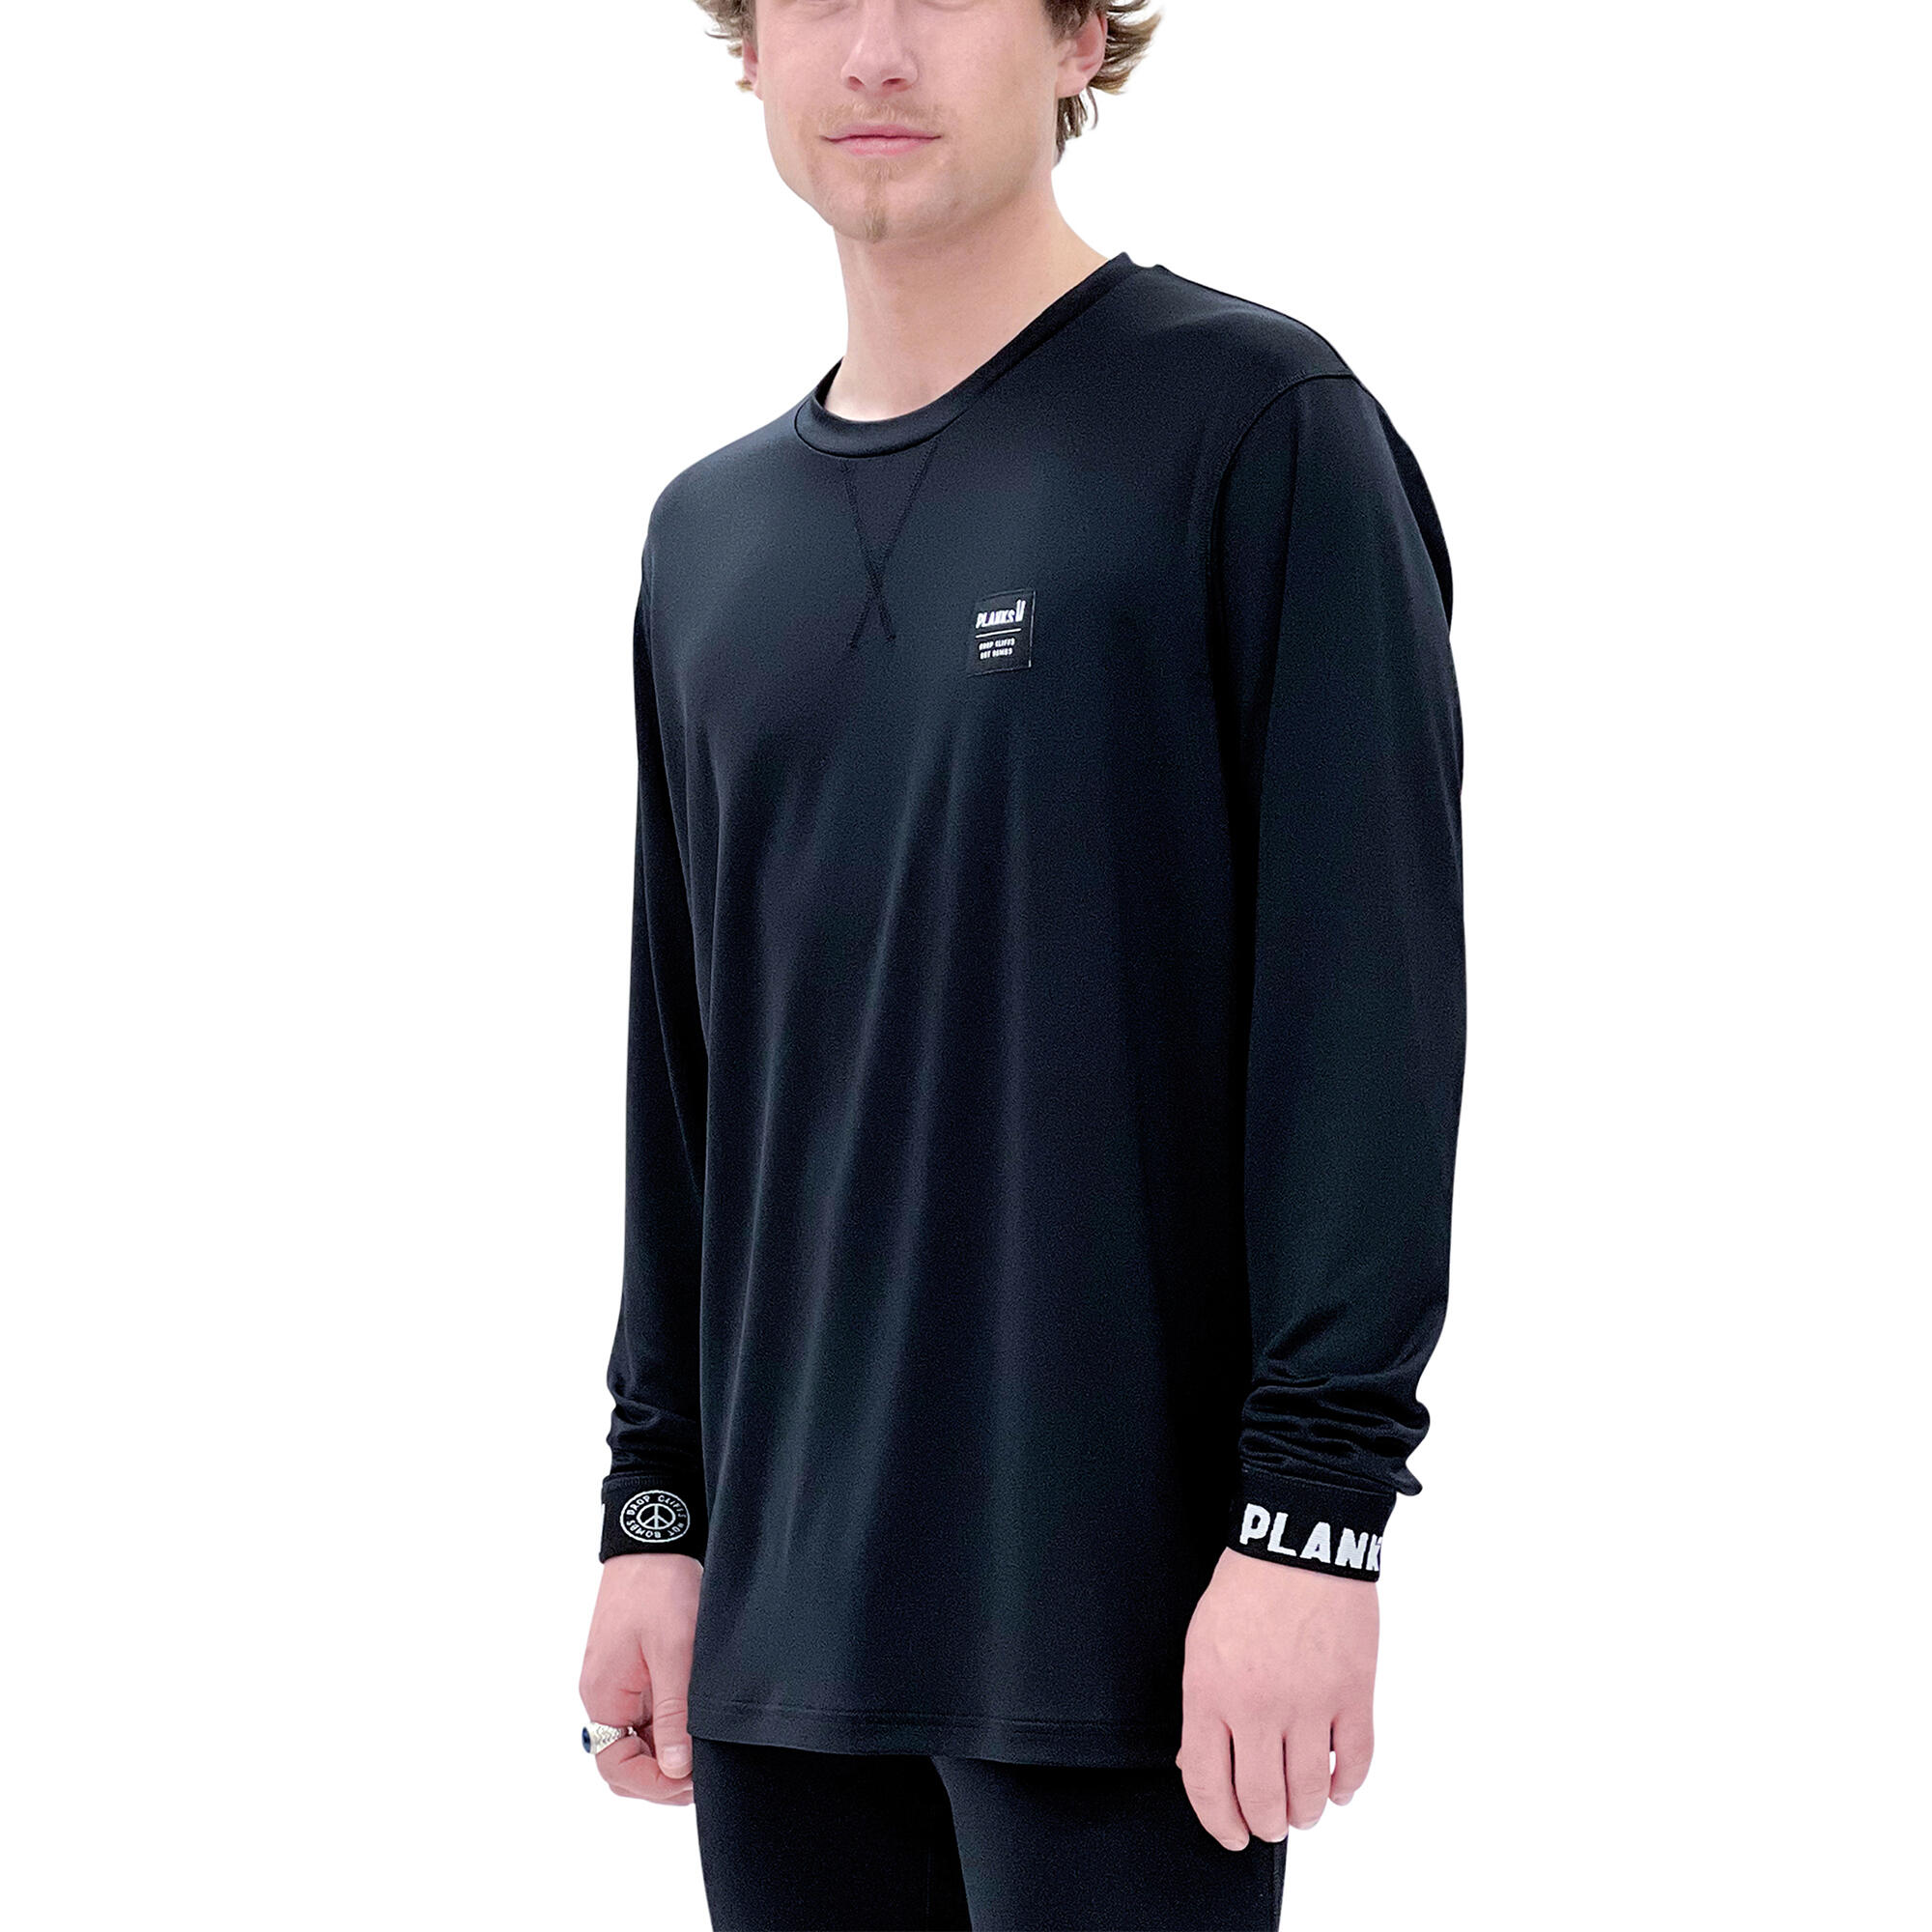 Planks Men's Fall-Line Base Layer Top in Black - Long Sleeve Fitness T-Shirt 2/3